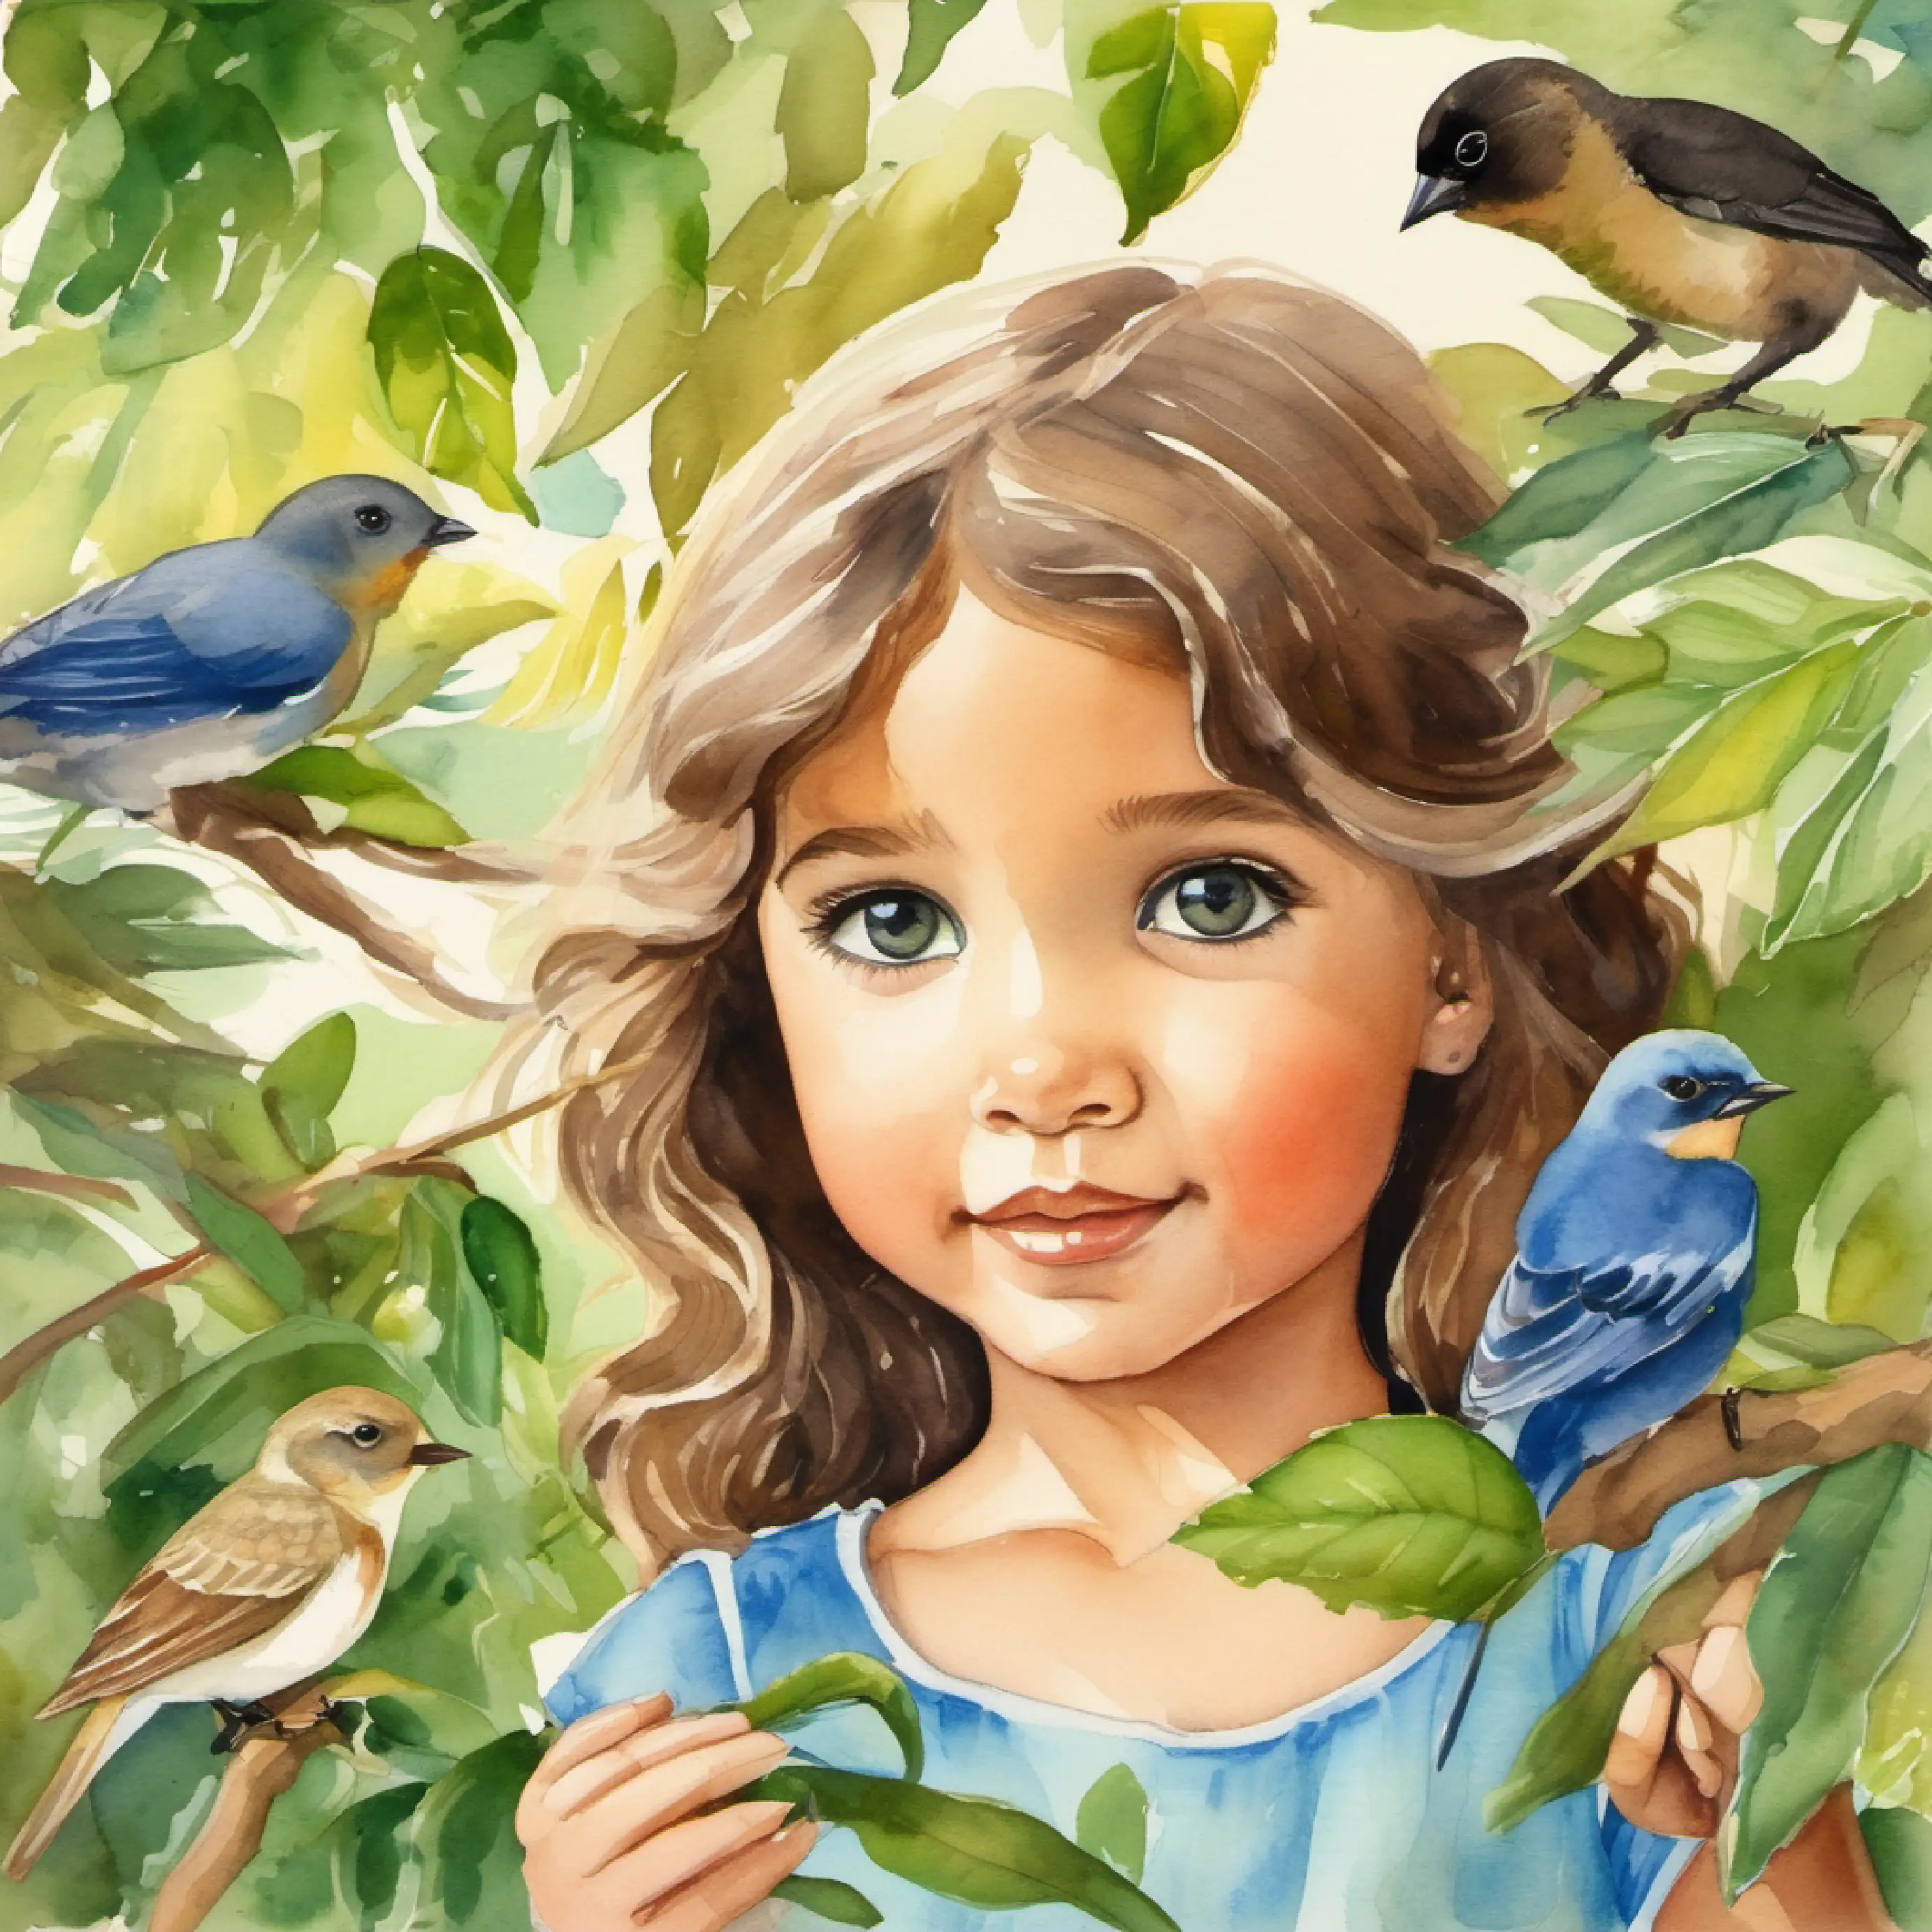 Discovery of baby birds by Girl with brown hair, fair skin, and green eyes, Girl with blonde hair, olive skin, and blue eyes, and Boy with black hair, tan skin, and brown eyes.